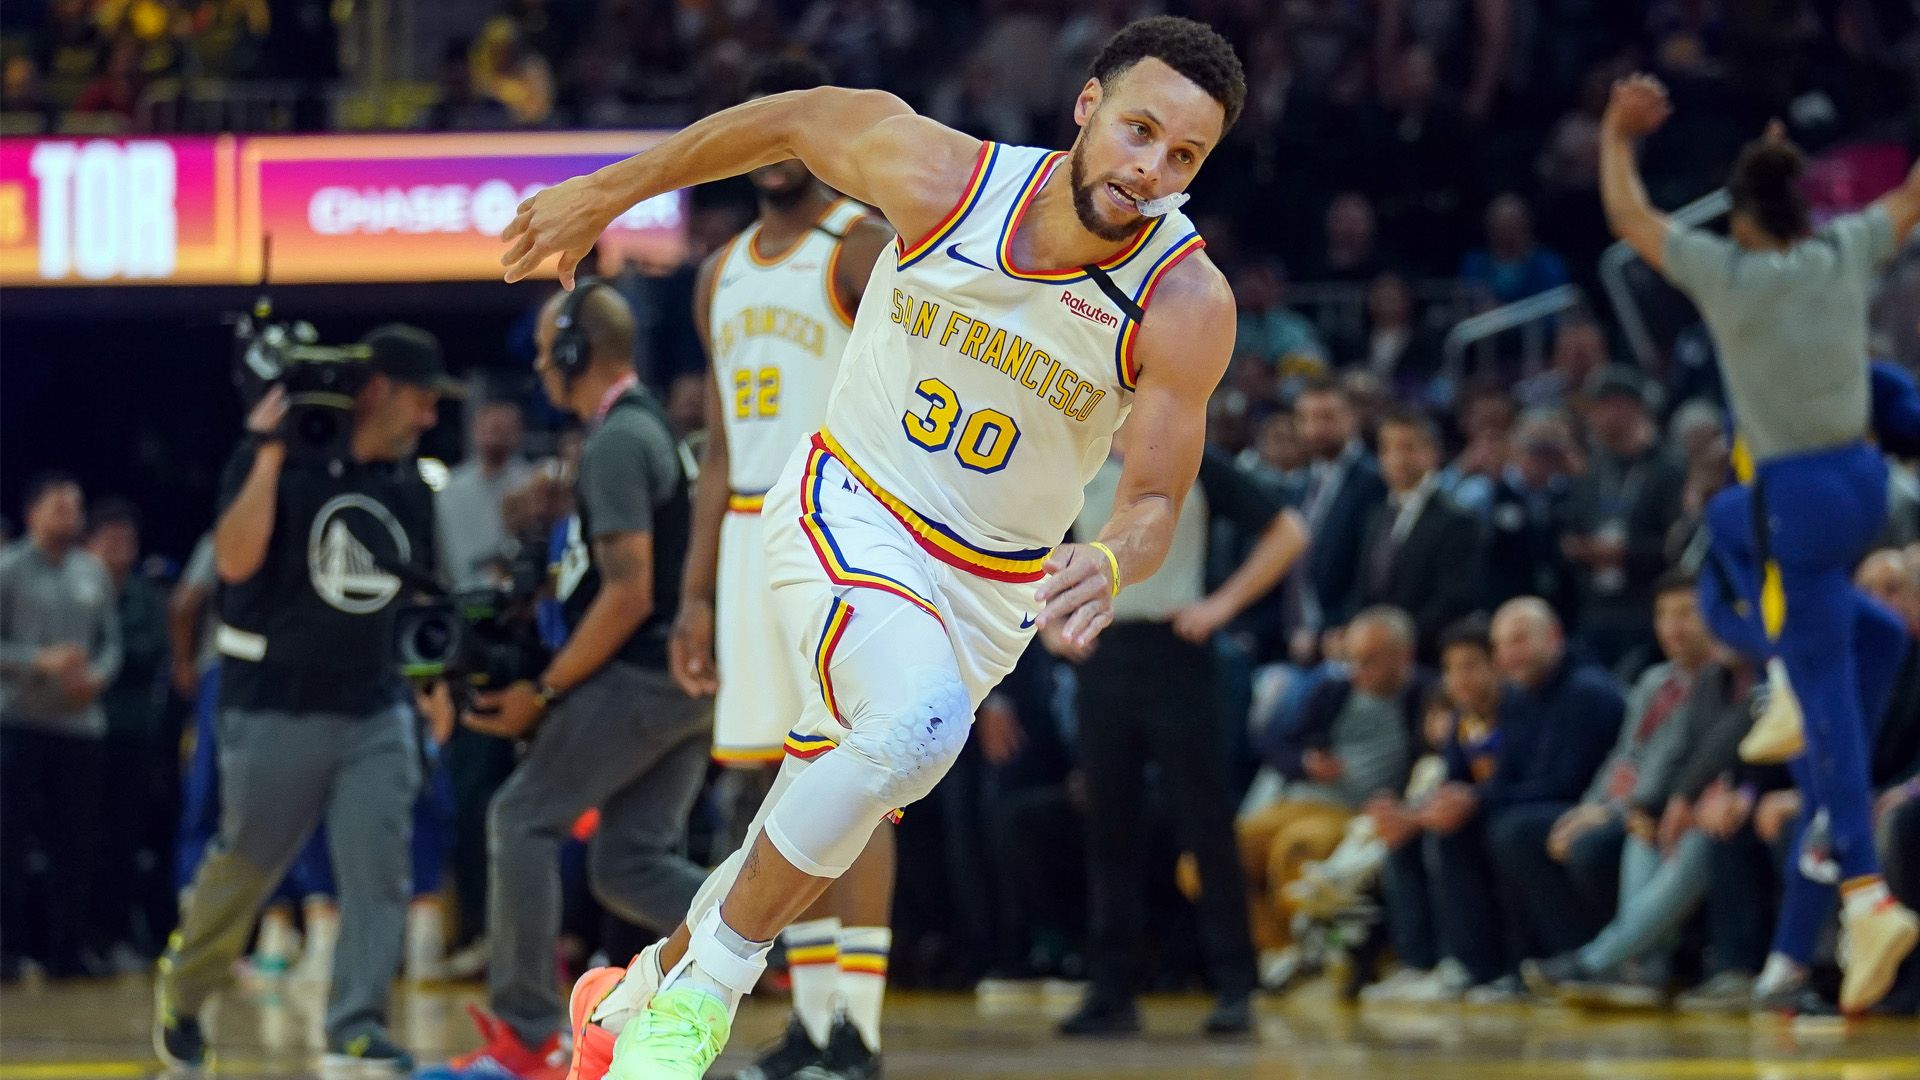 NBA Draft Lottery: Steph Curry returns, Warriors on pace for No. 1.